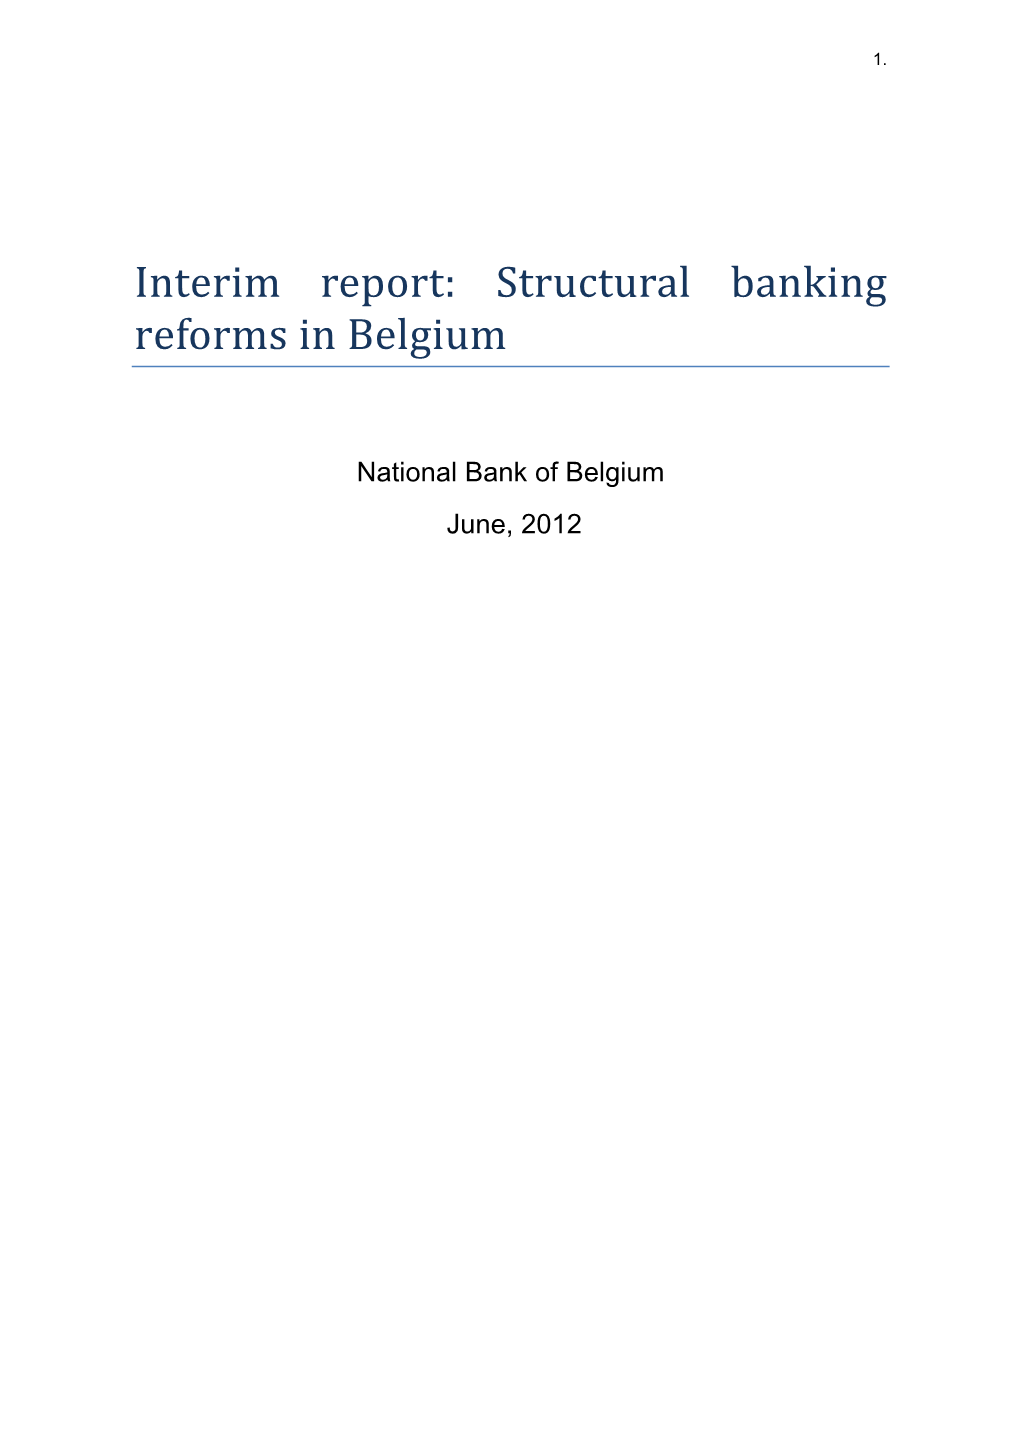 Structural Banking Reforms in Belgium